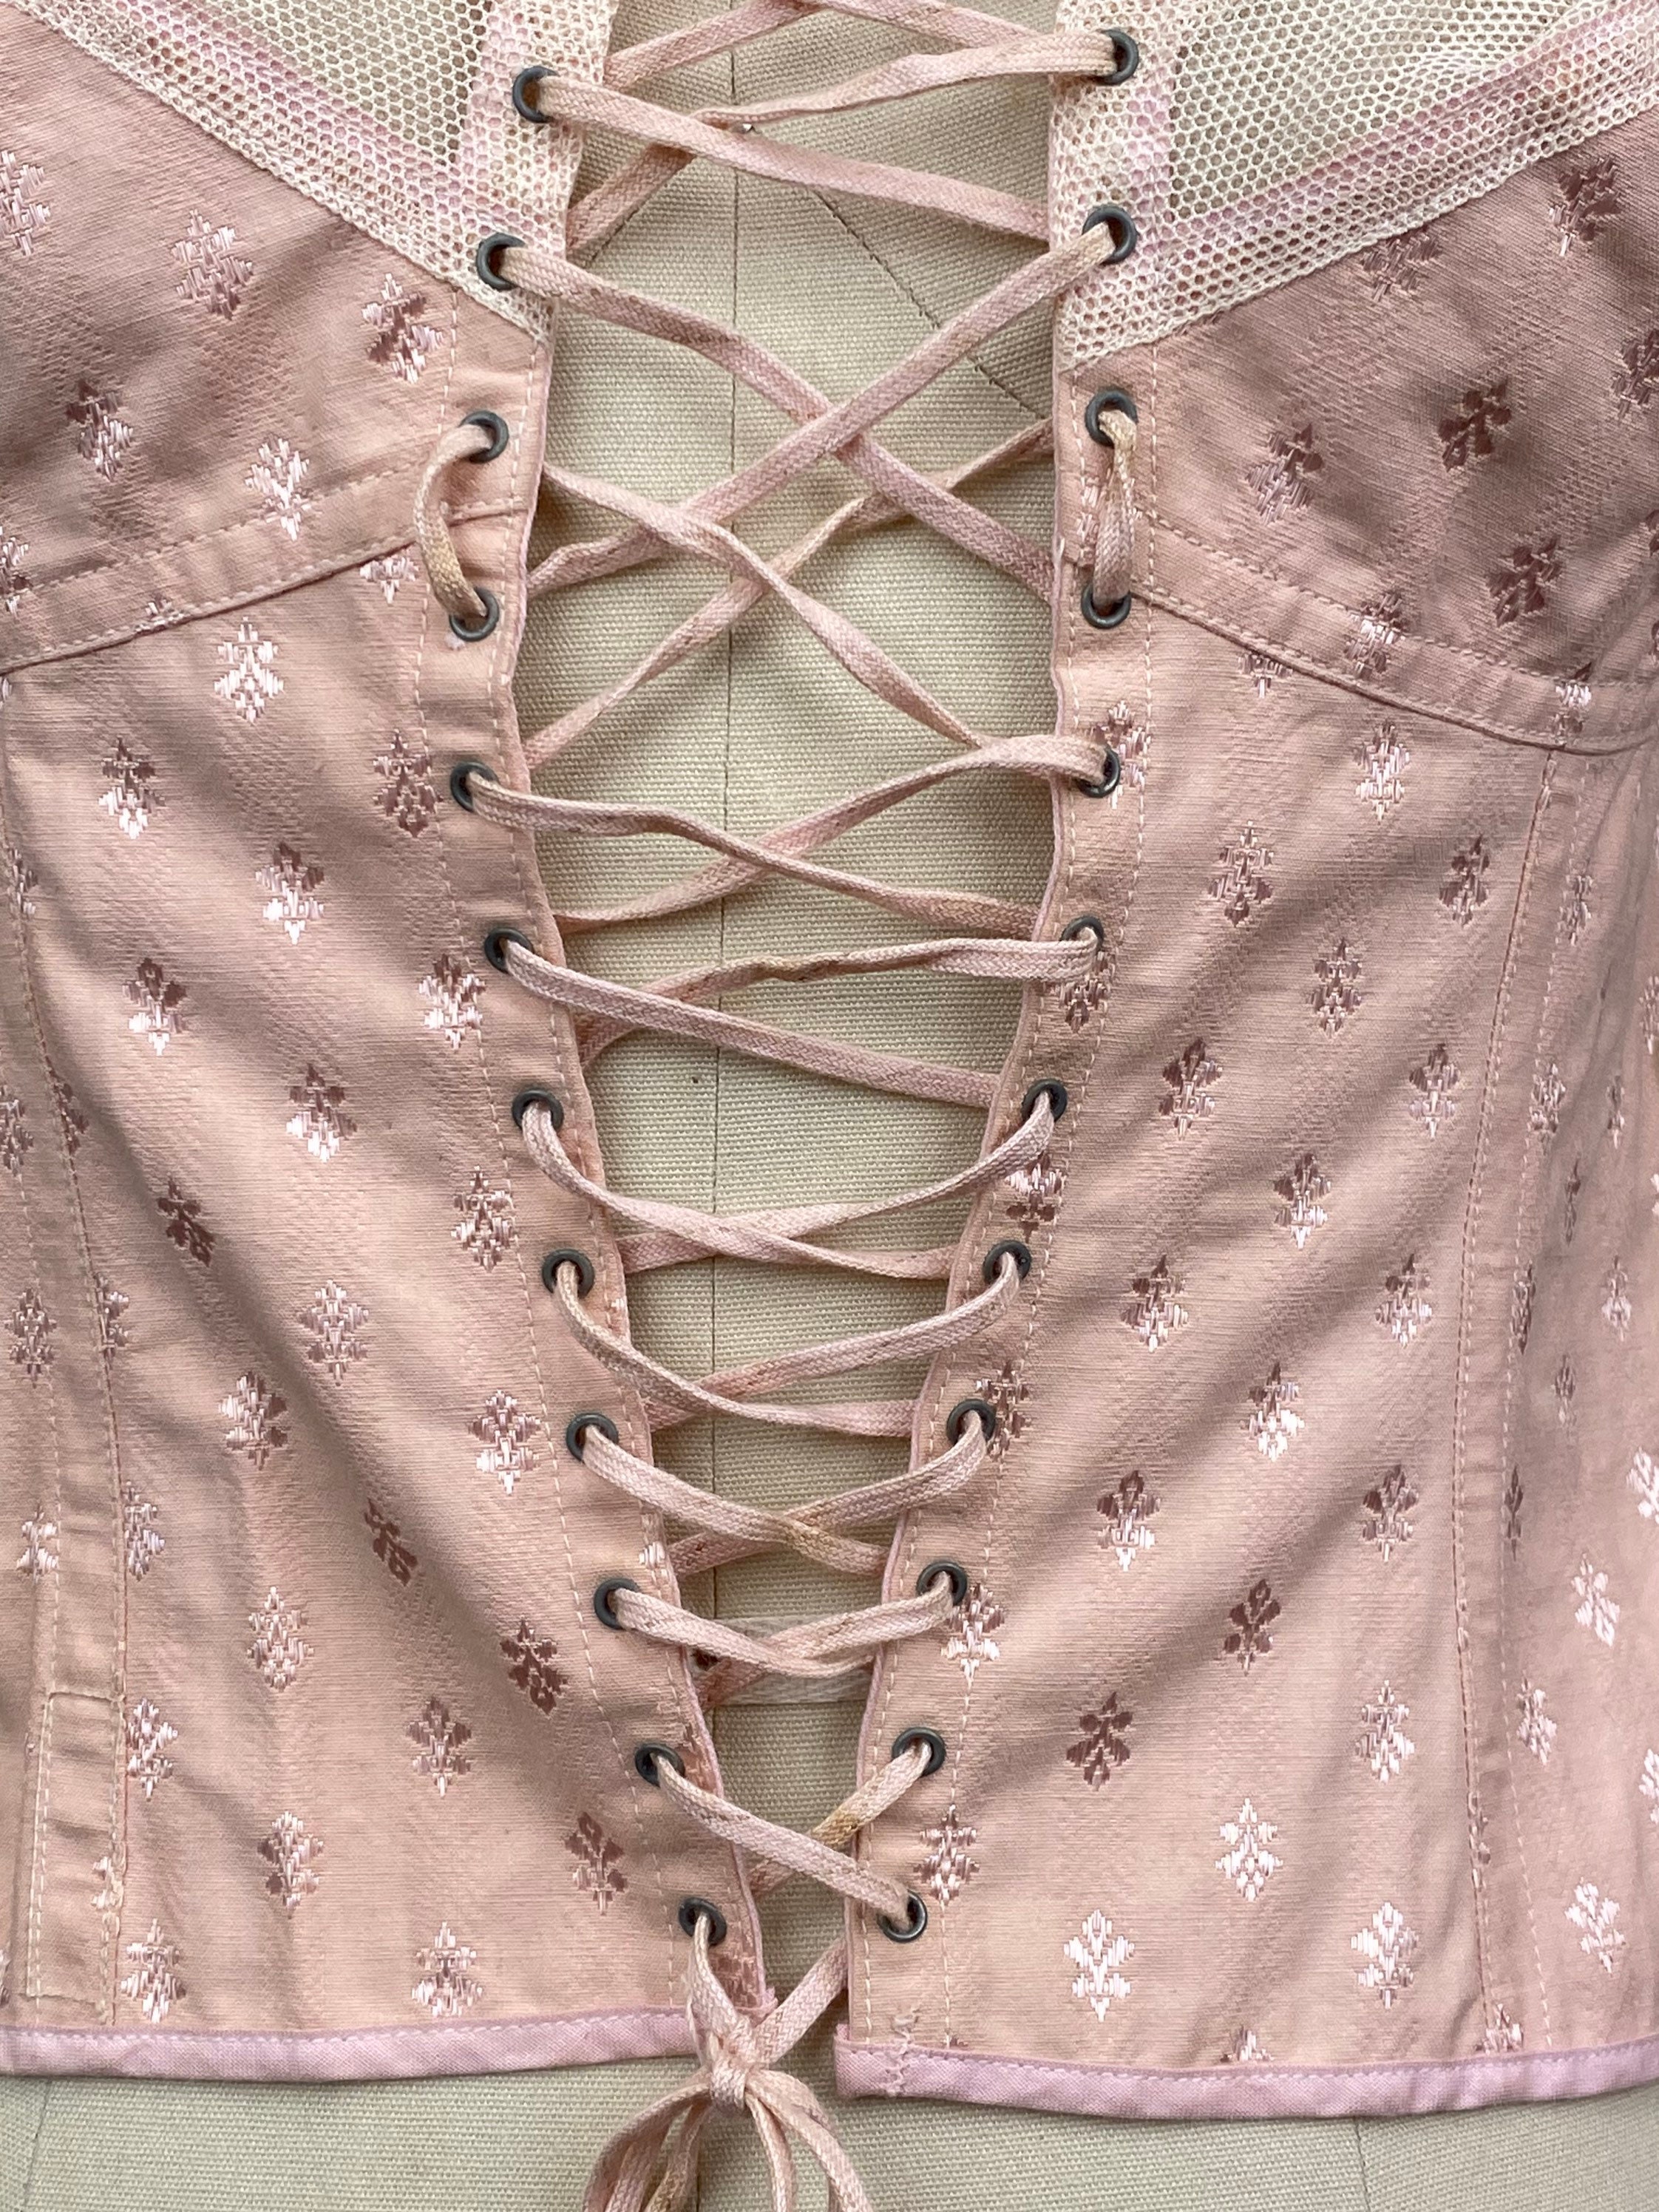 Rare Vintage Early 1900s Spirella Corset, Bustier, Lace up Undergarment  With Original Cover, Size Slender, Body Shaper, Pale Blush Pink -  New  Zealand